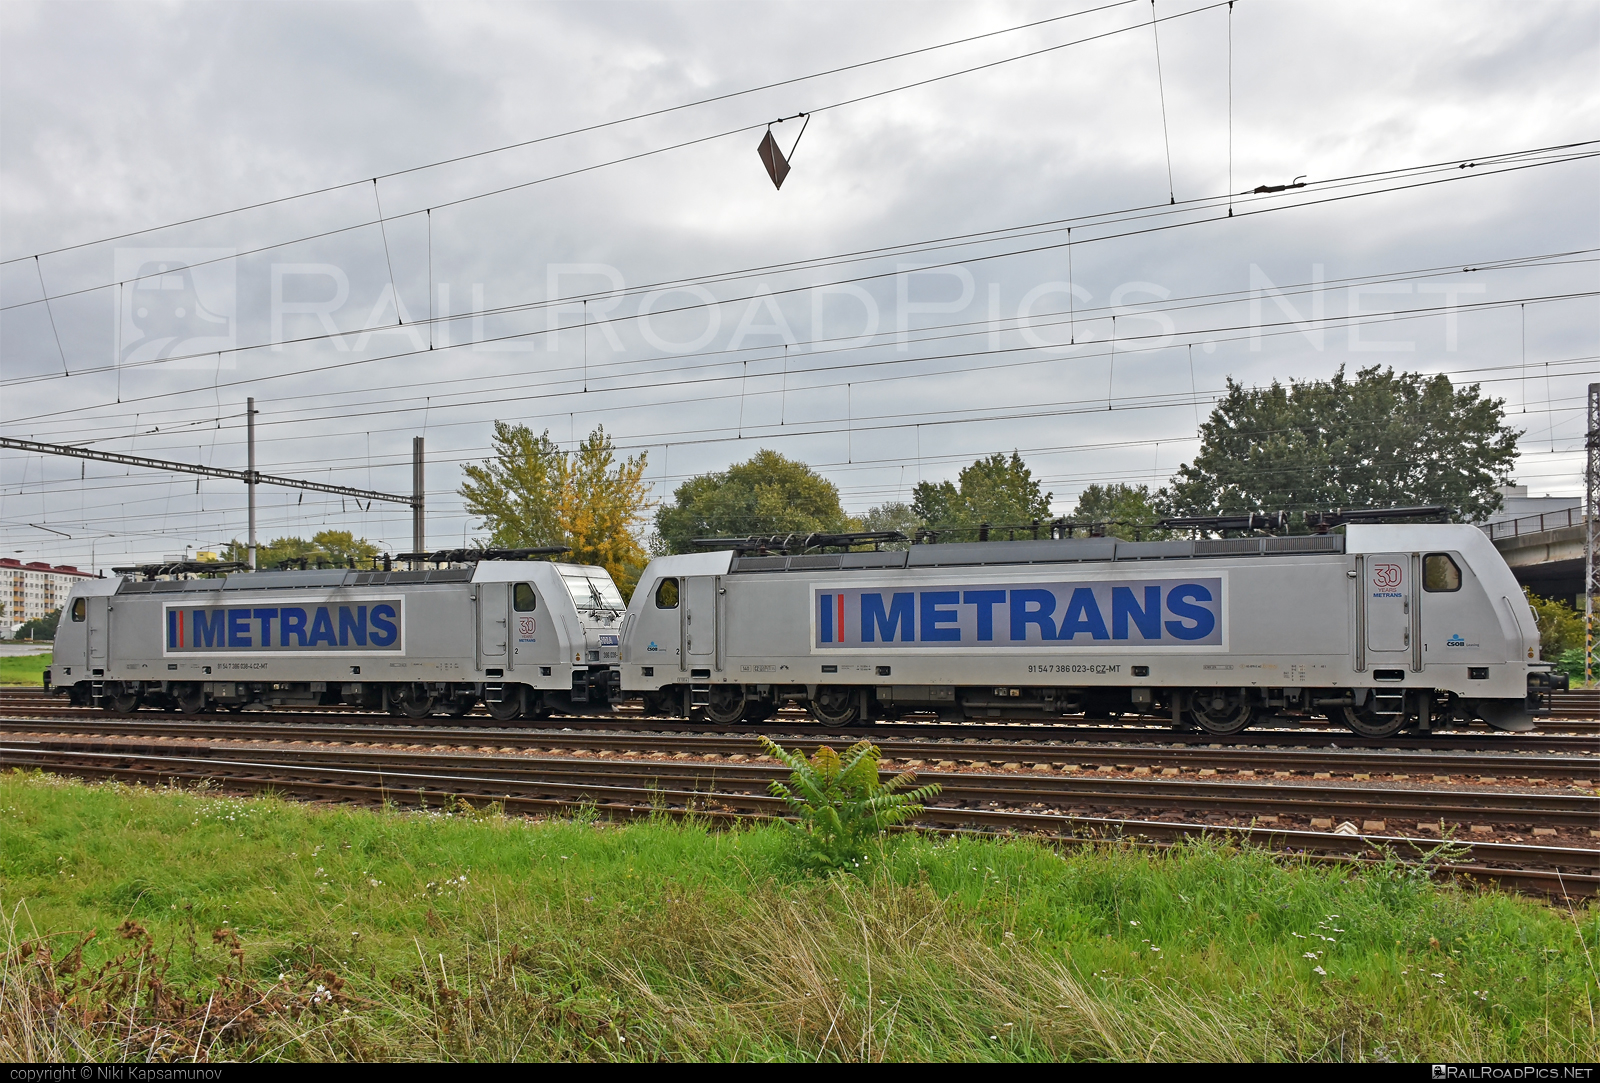 Bombardier TRAXX F140 MS - 386 023-6 operated by METRANS Rail s.r.o. #bombardier #bombardiertraxx #hhla #metrans #metransrail #traxx #traxxf140 #traxxf140ms